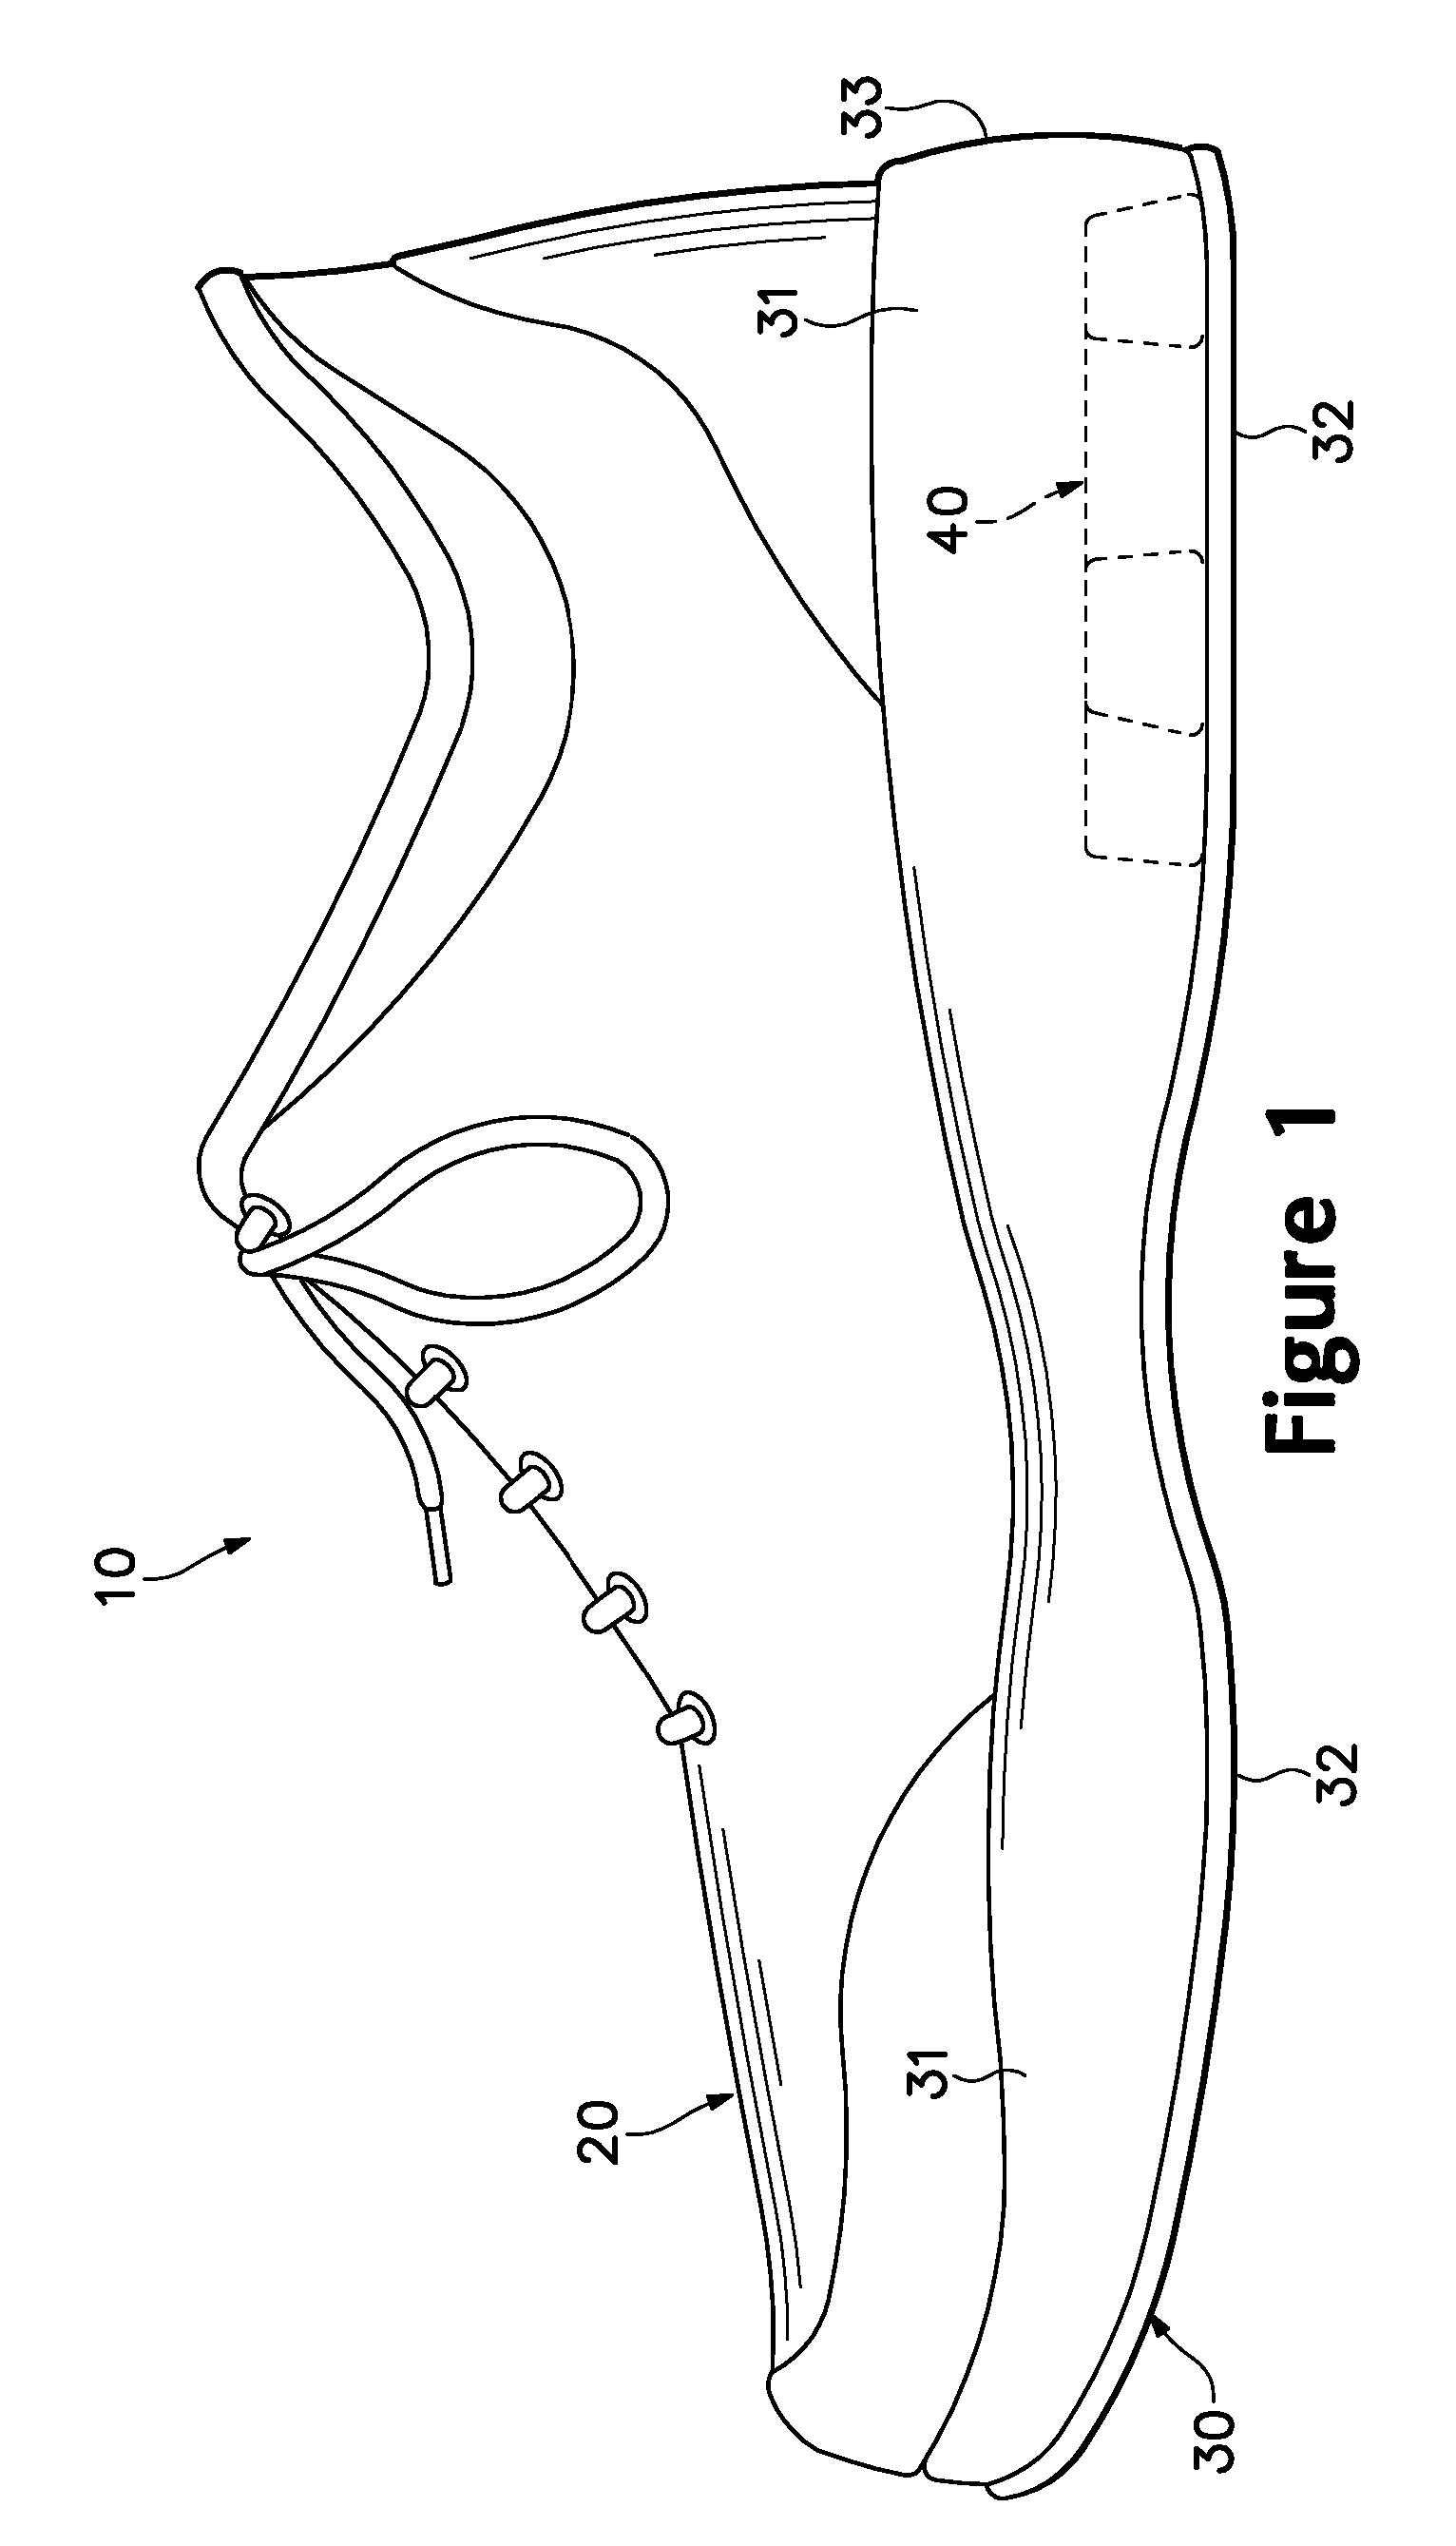 Footwear With A Sole Structure Incorporating A Lobed Fluid-Filled Chamber